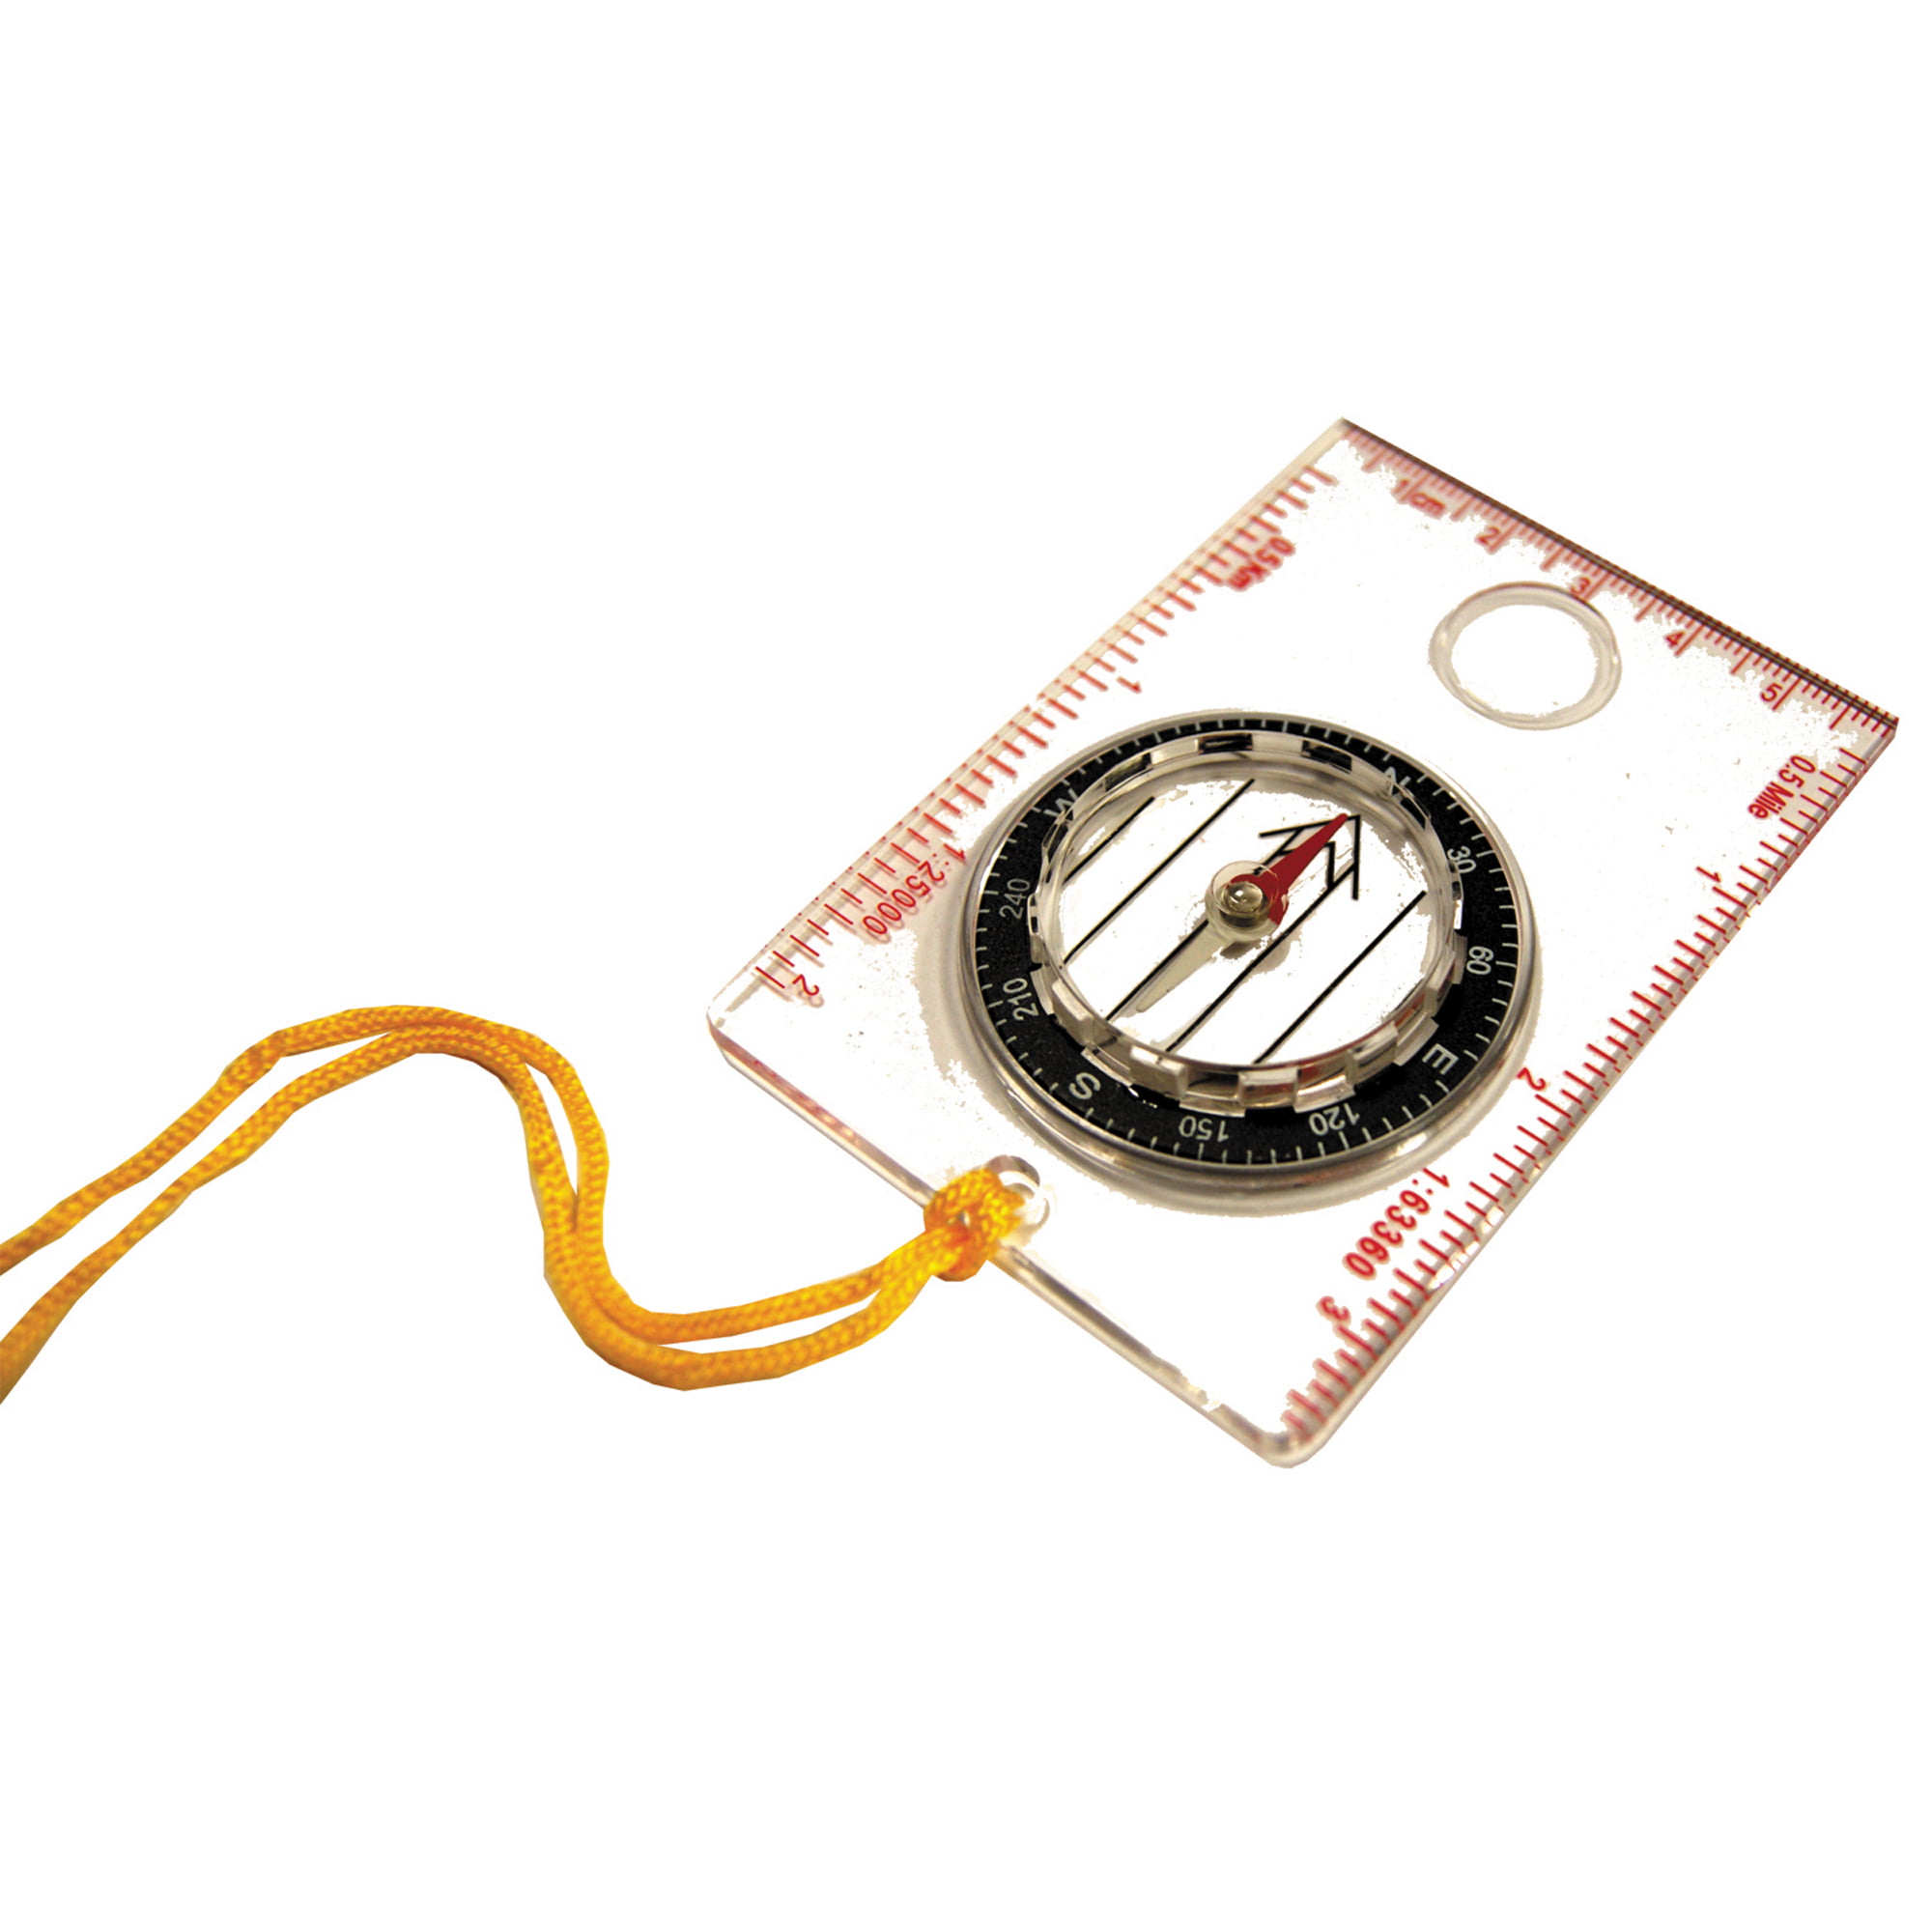 Clear Ultimate Survival Technologies Waypoint Camping Compass 